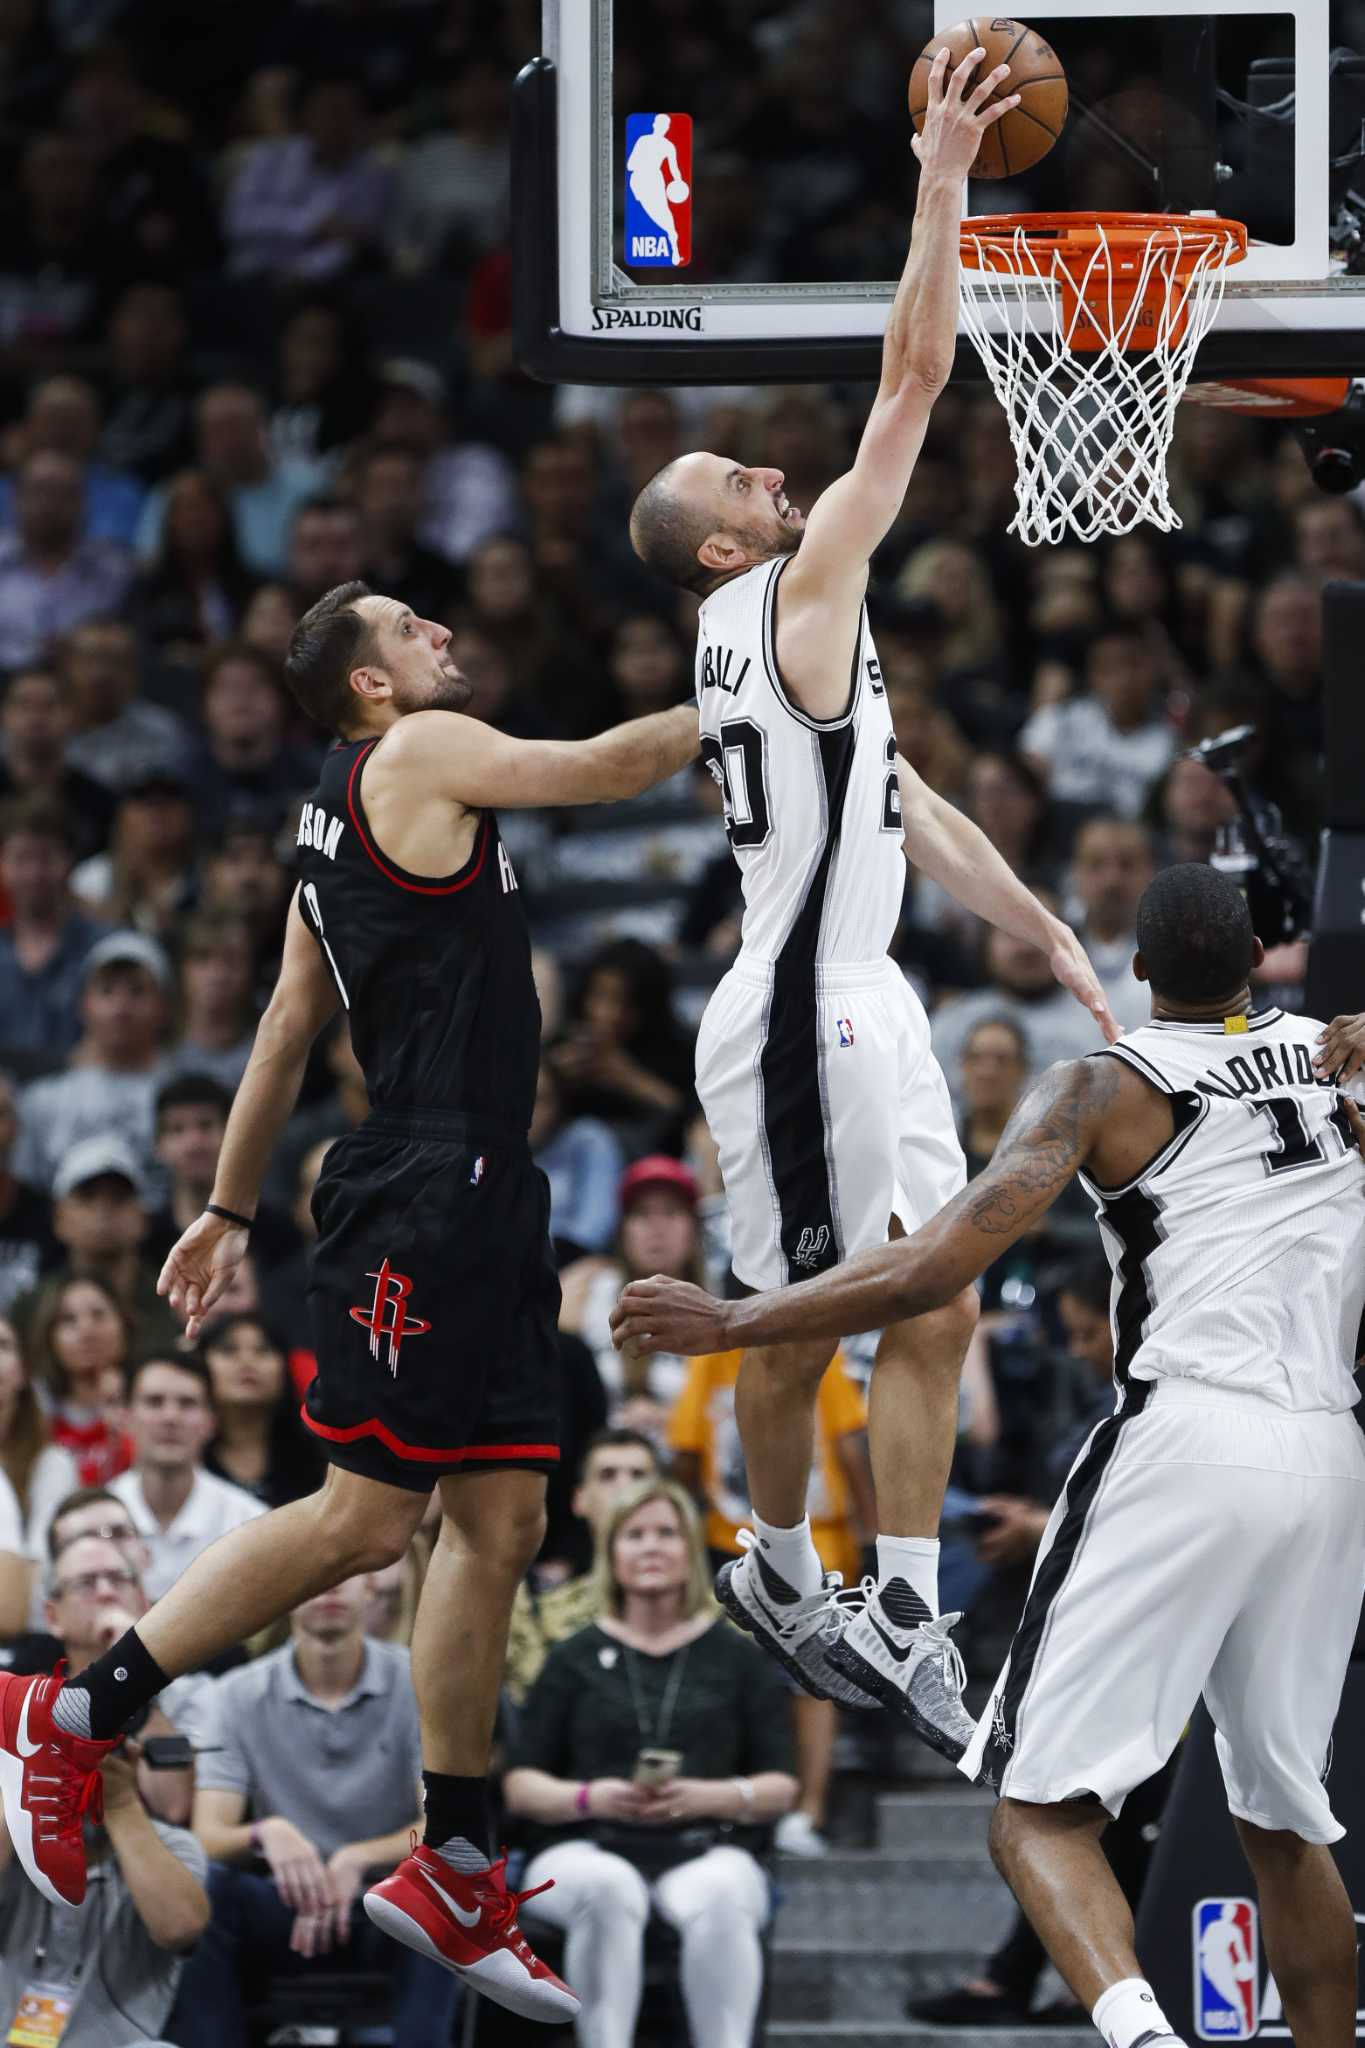 Spurs' Manu Ginobili relies on instincts to defend final play - Houston Chronicle1365 x 2048